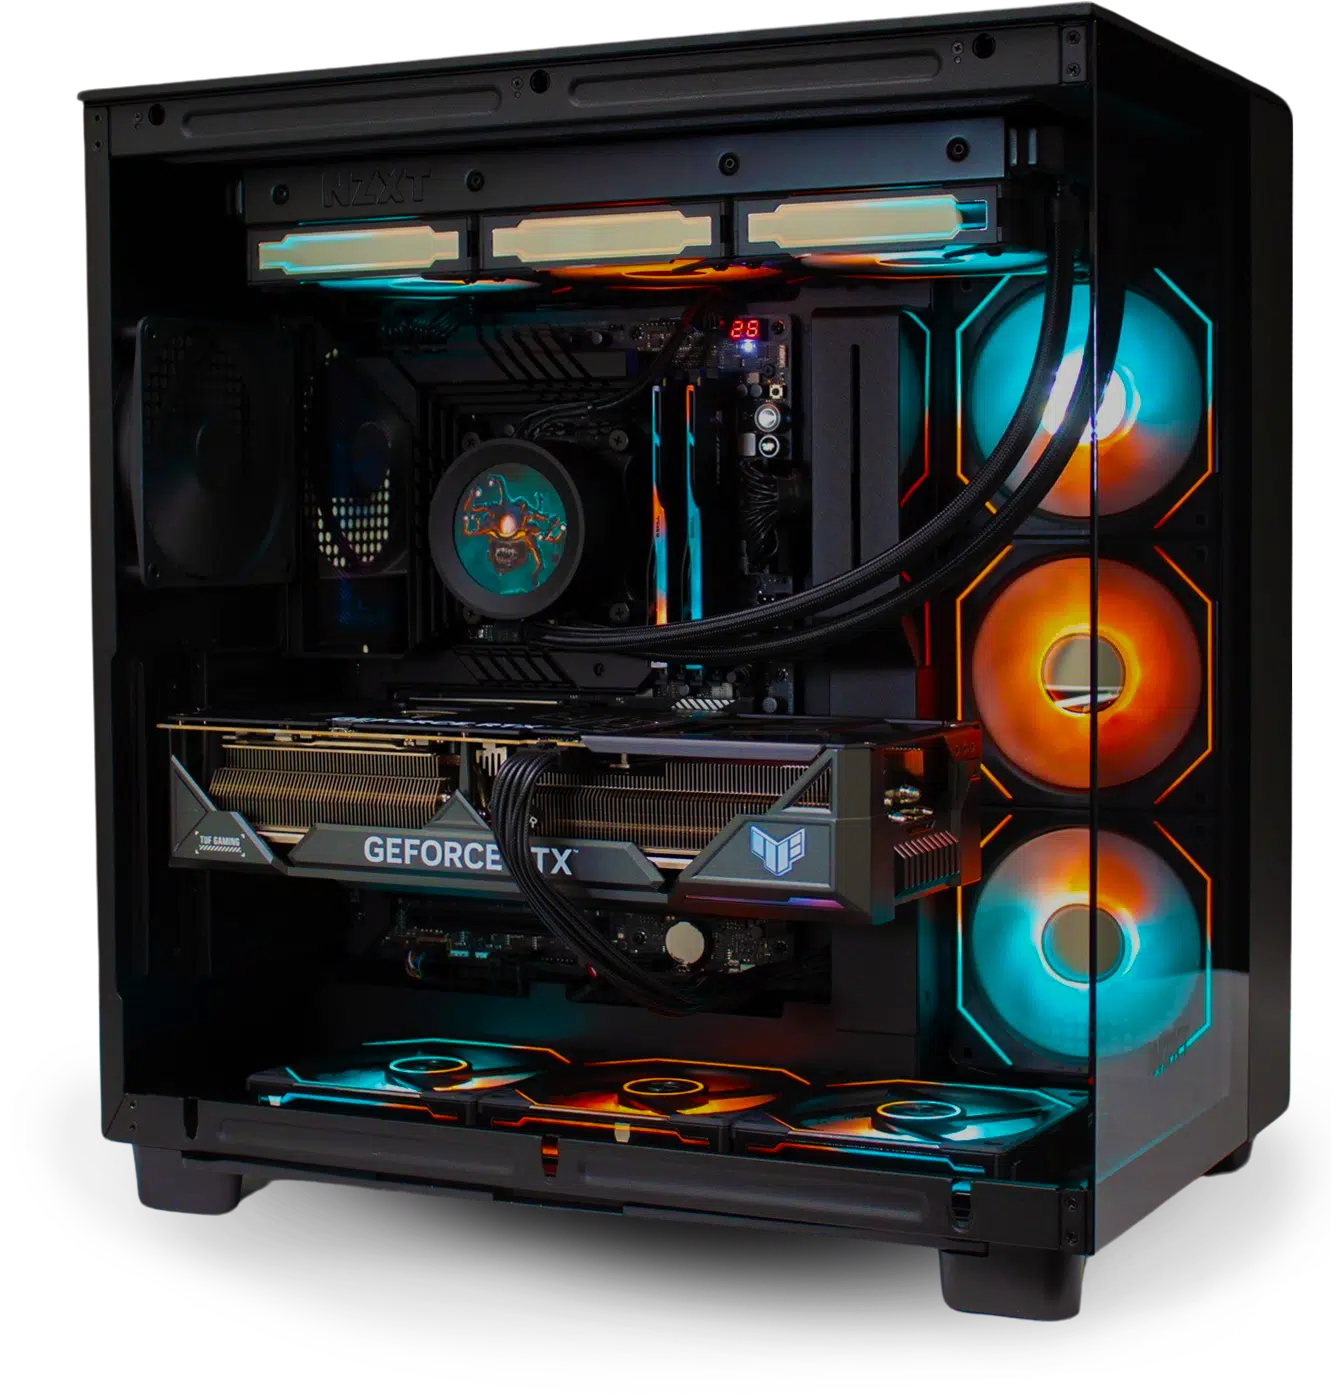 custom built pc with blue and red led light accents